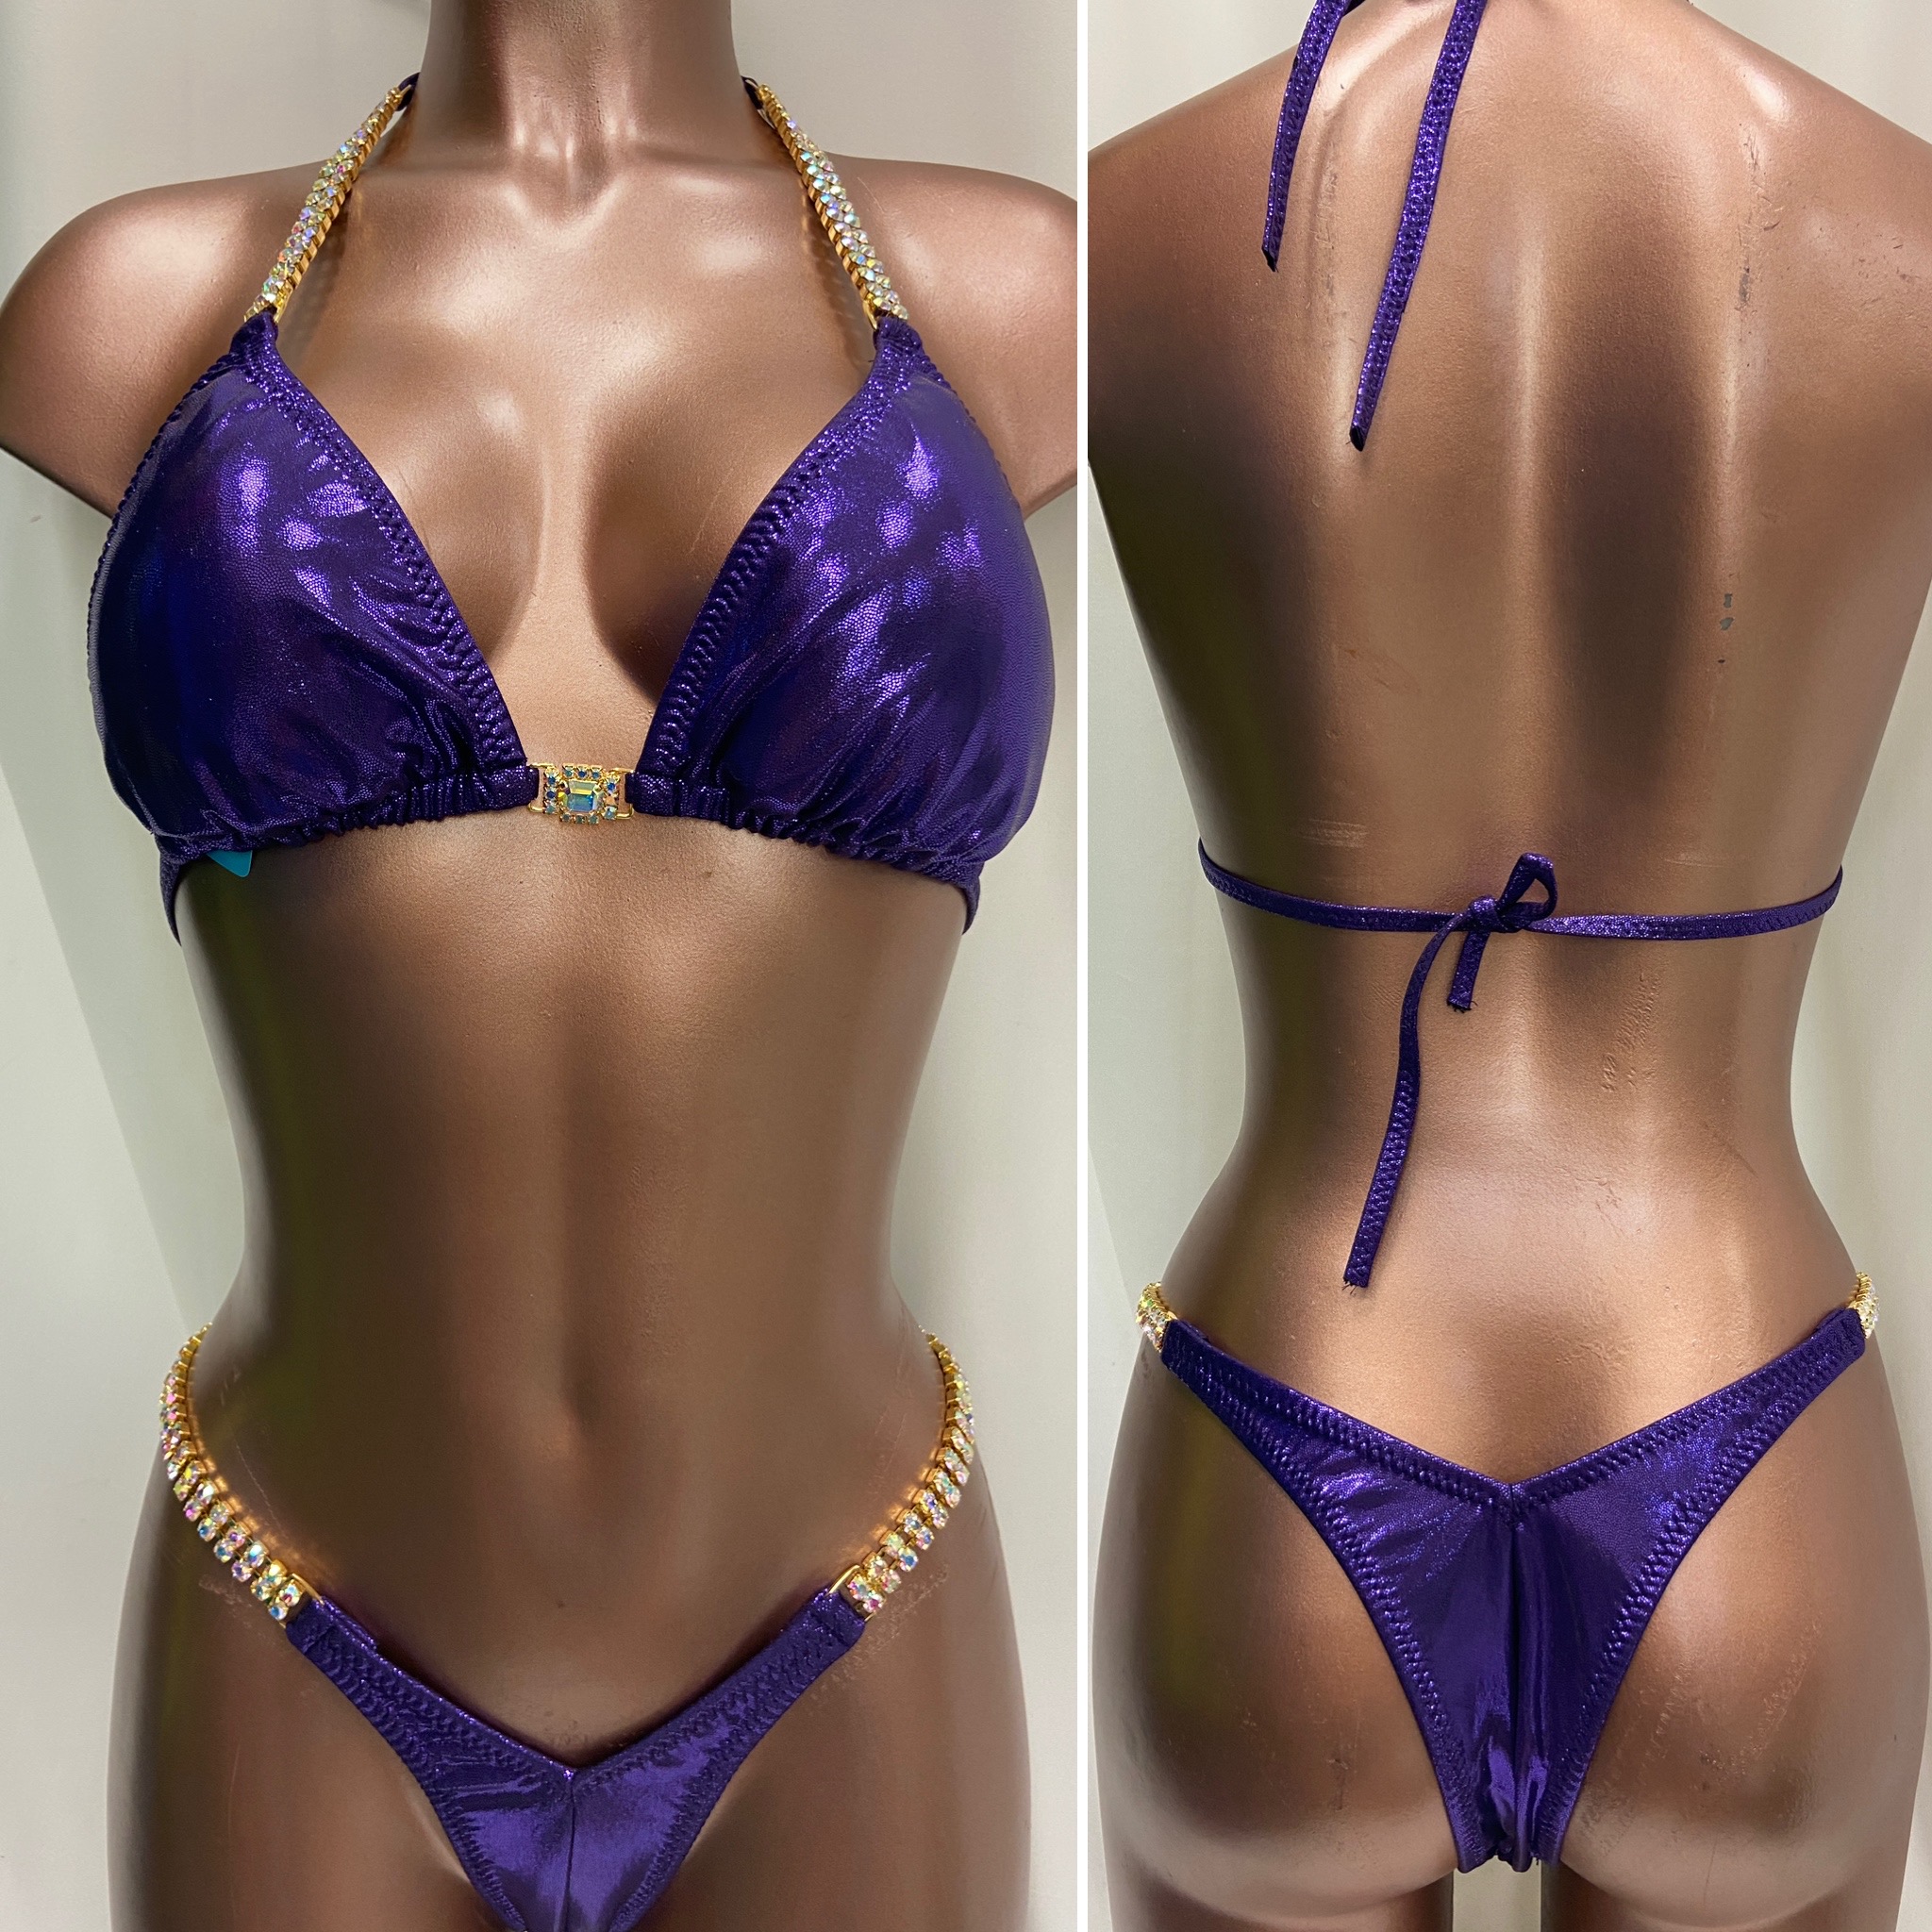 P8028 
$155
C+ sliding slim top
medium, xxxsmall back 
connectors are gold toned ab
can add hooks to the back 
purple frost 